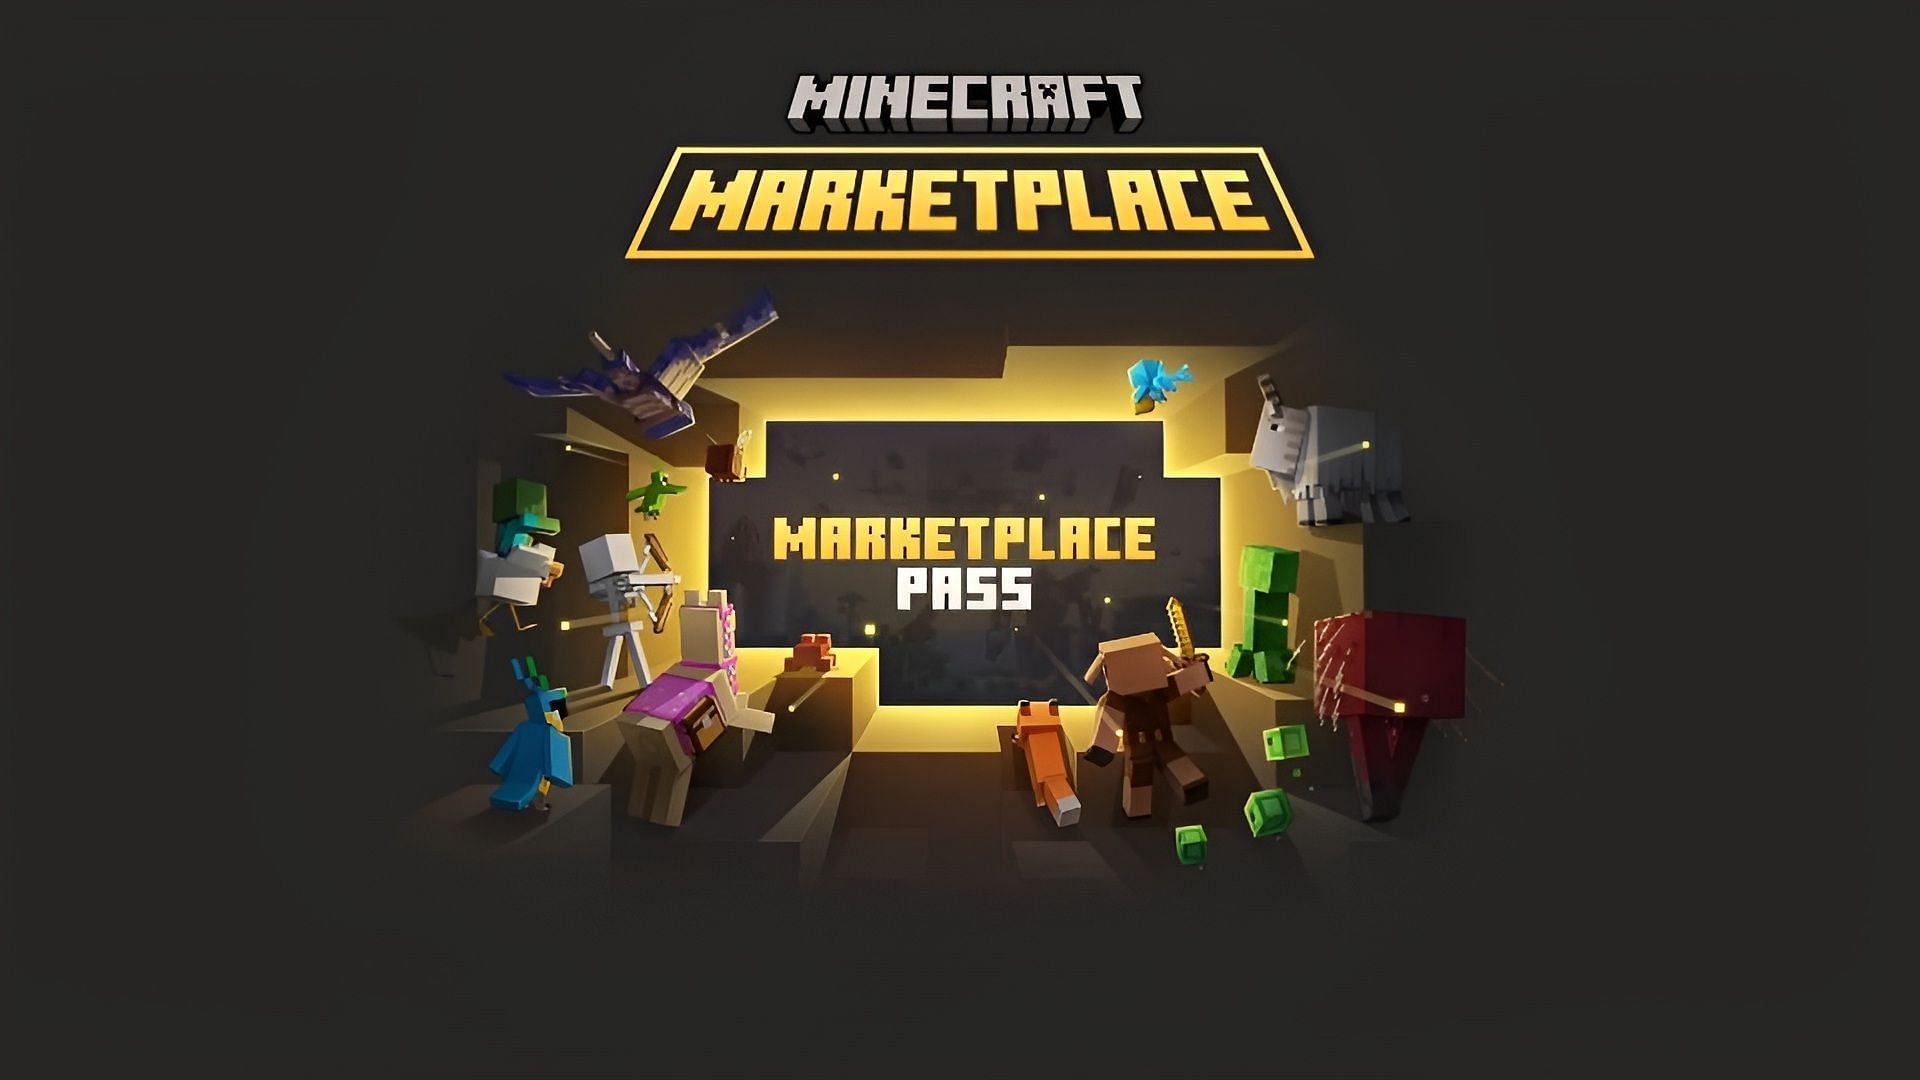 Minecraft Marketplace Pass: Available DLC packs and how to find them